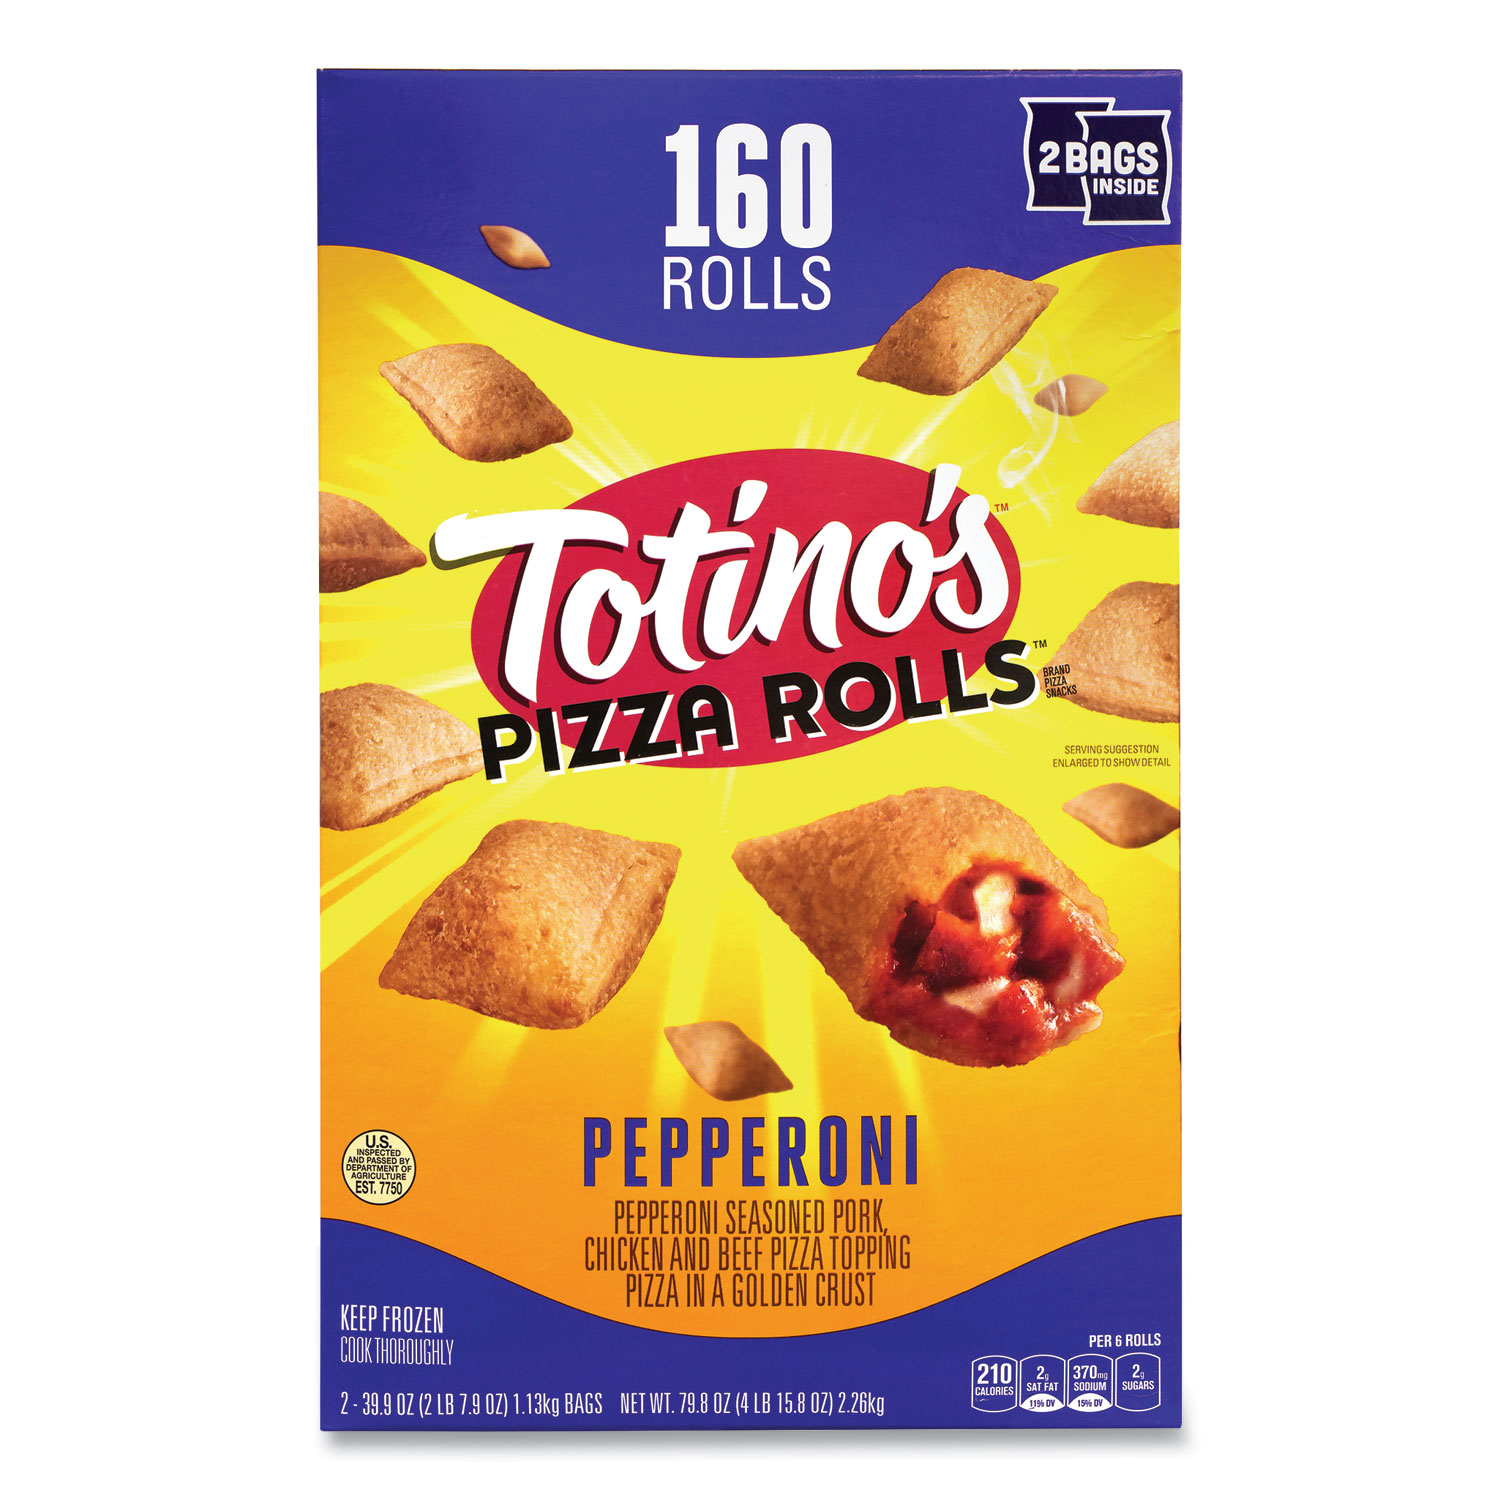 Totinos® Pizza Rolls® Pepperoni Pizza Rolls, 39.9 oz Bag, 80 Rolls/Bag, 2 Bags/Box, Free Delivery in 1-4 Business Days